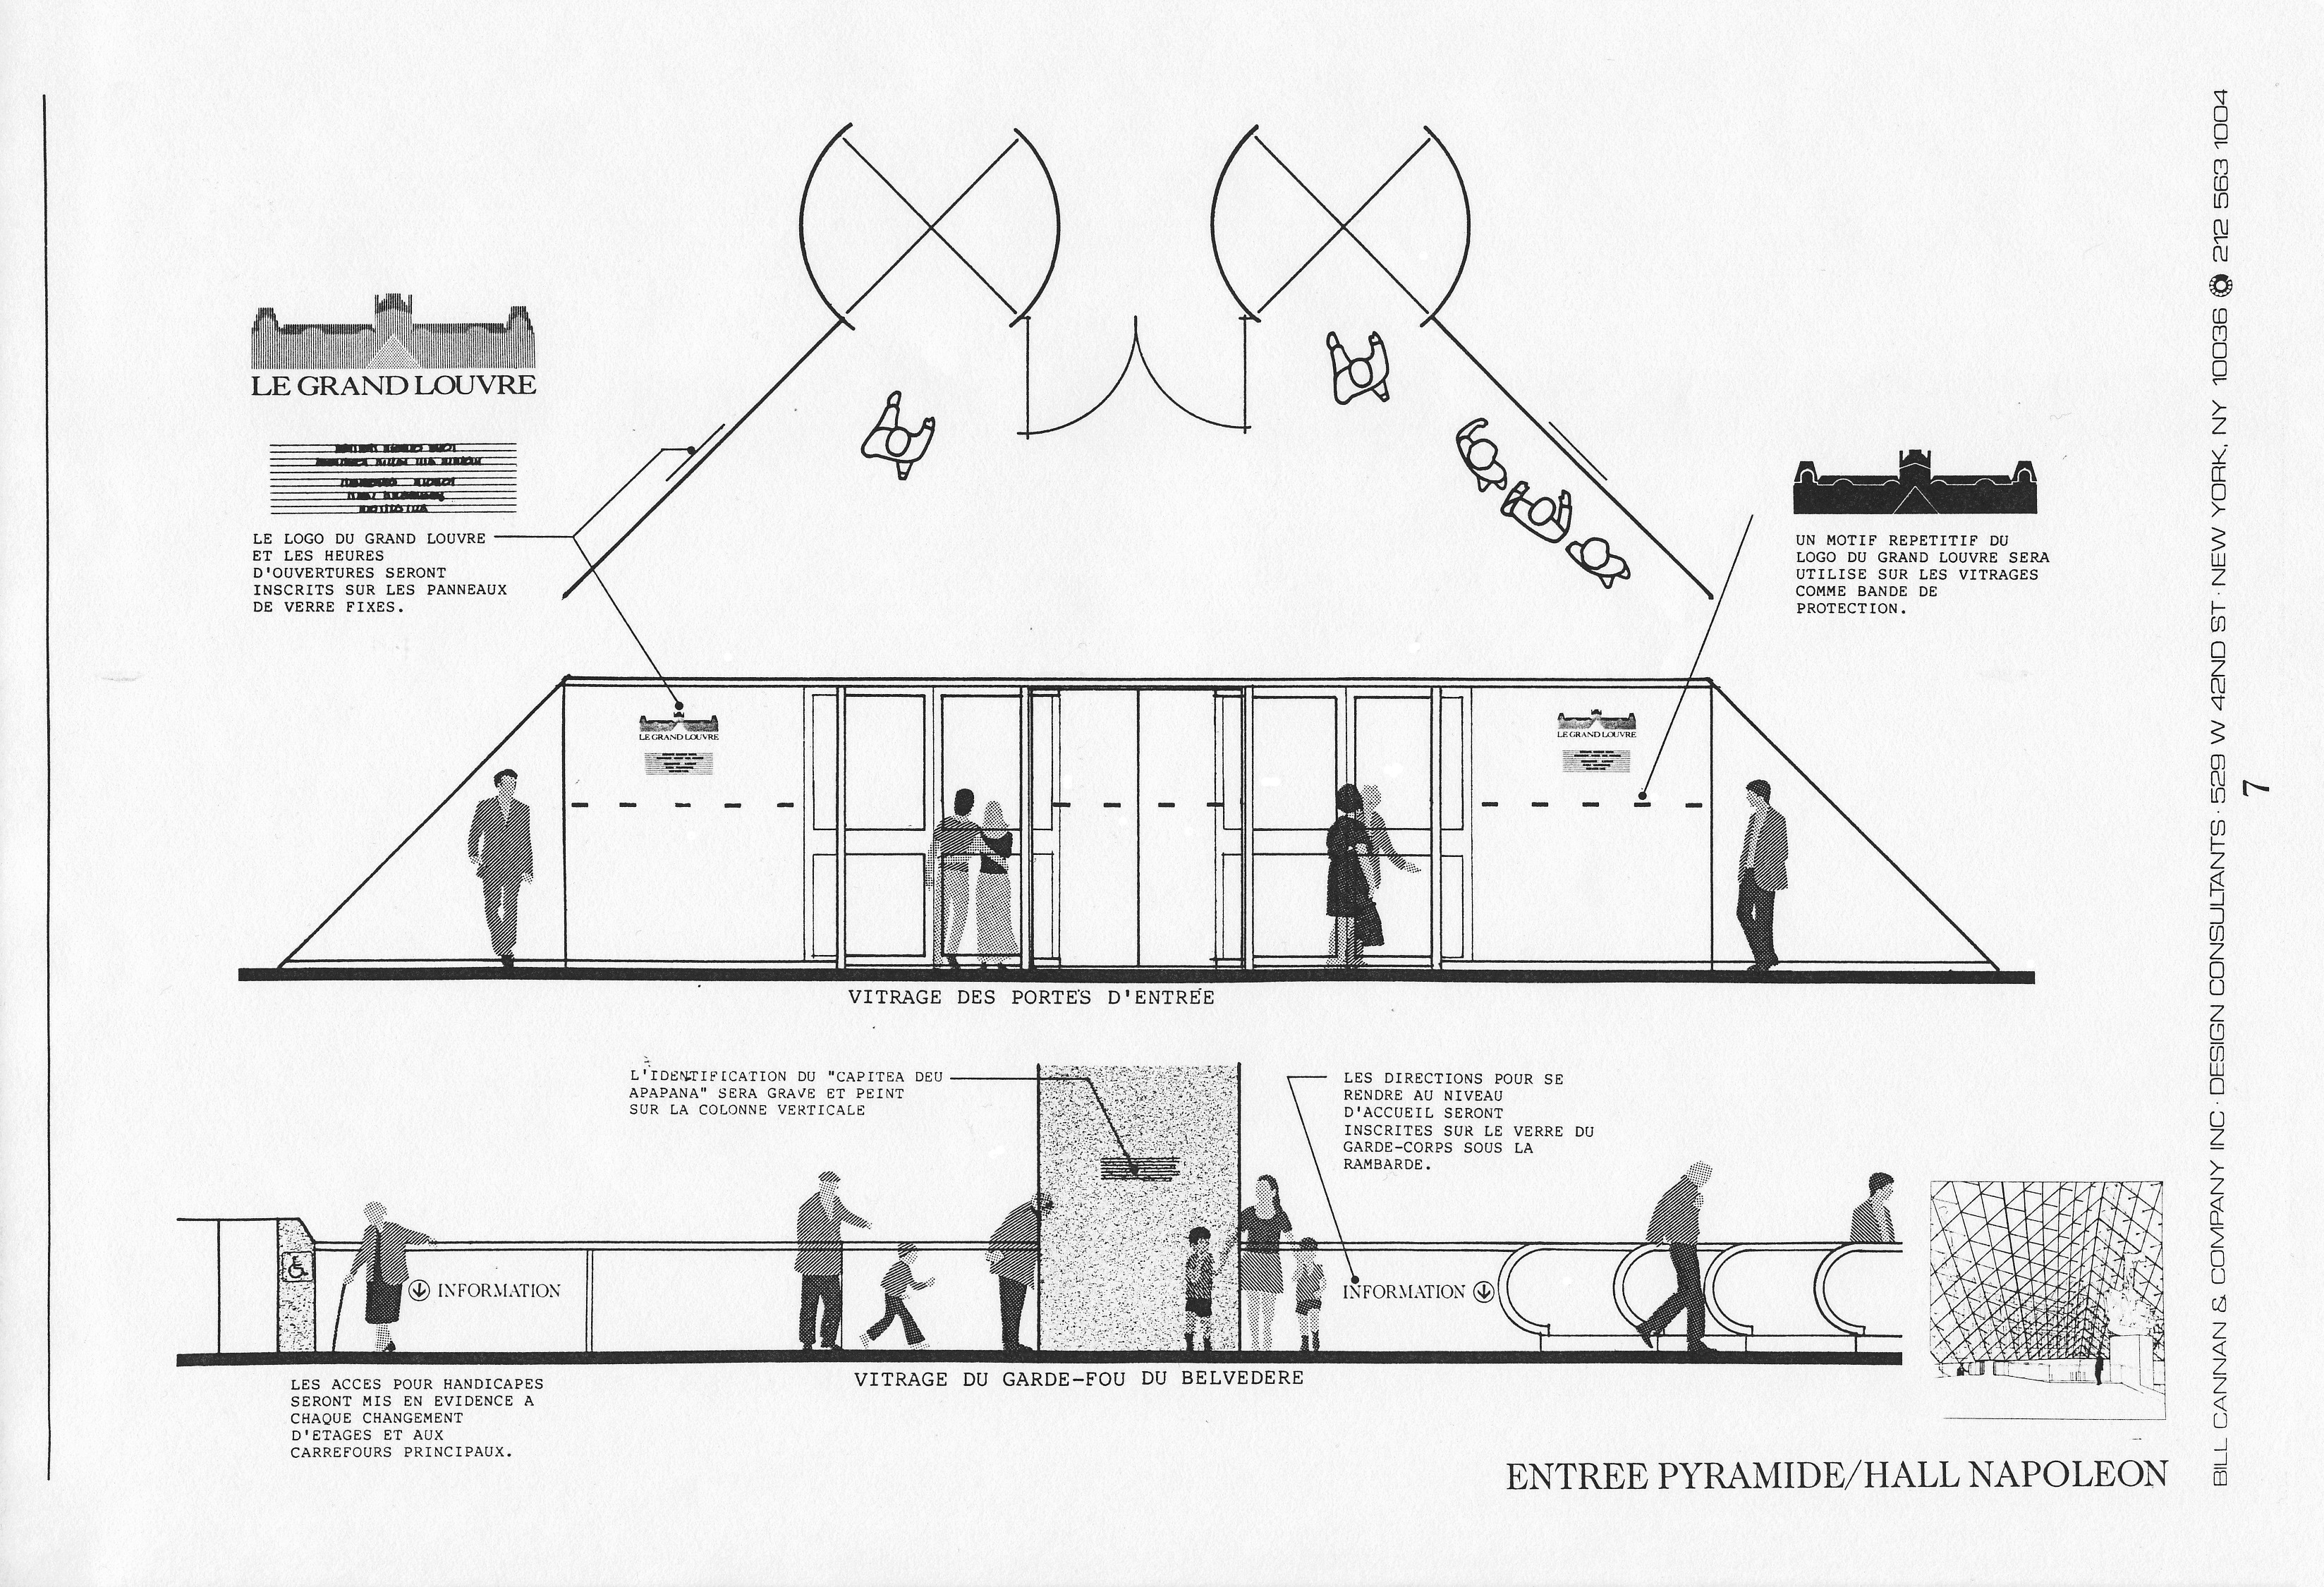 Cross sectional diagram of people nagigating through different levels down through the Pyramid entrance structure.